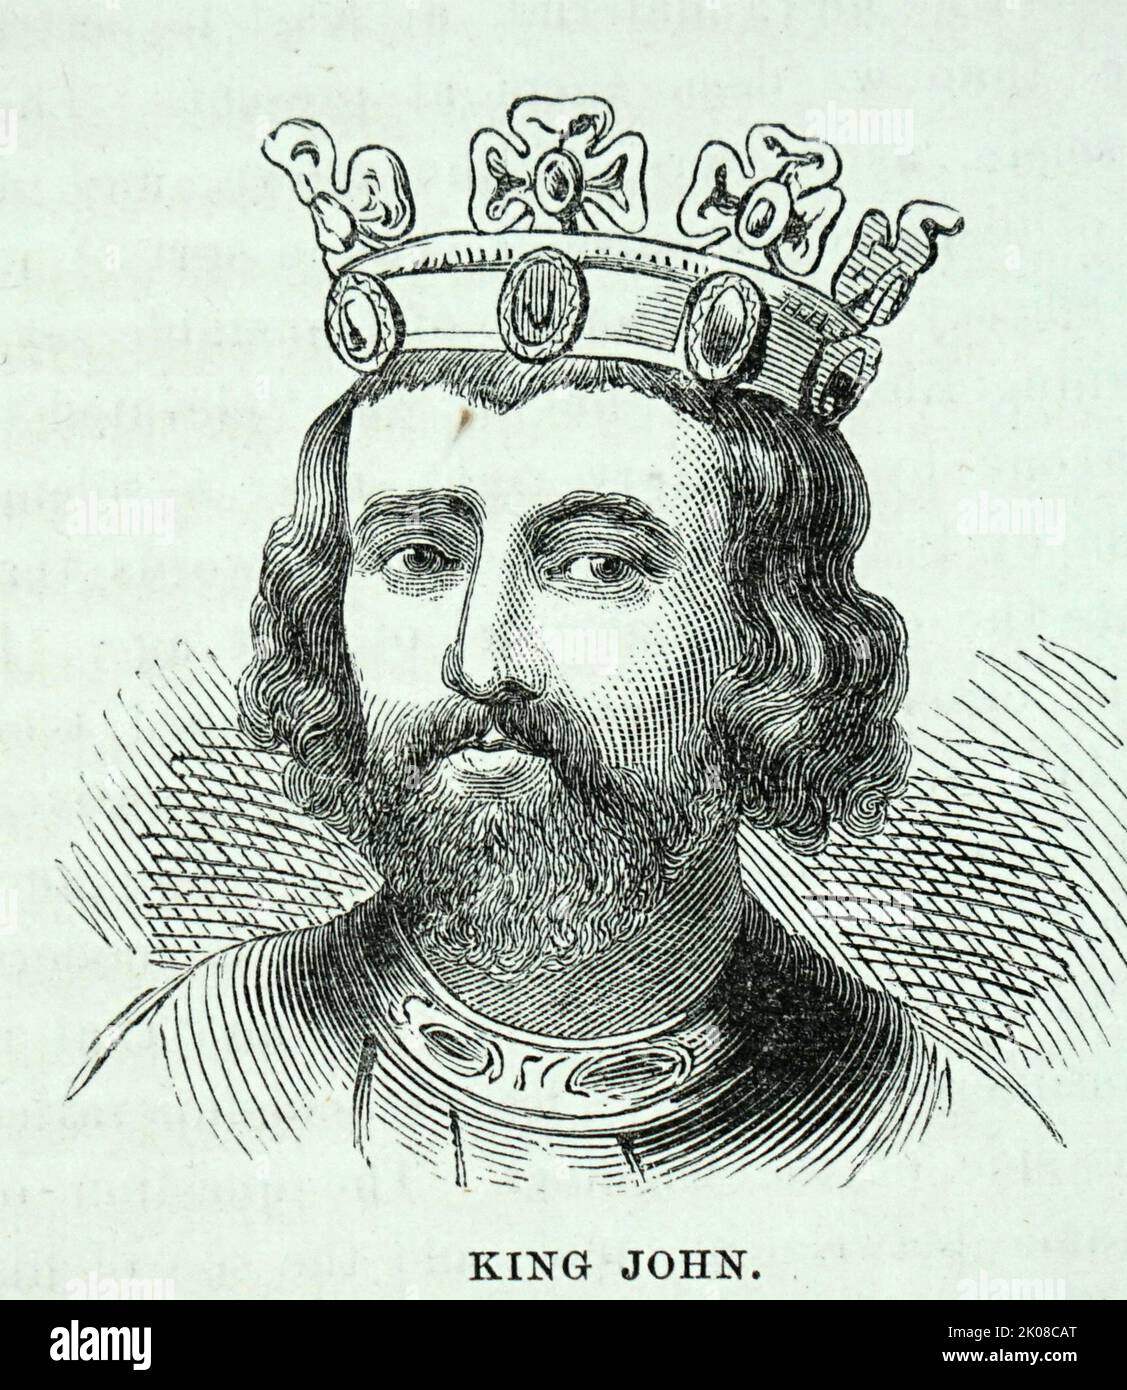 John (24 December 1166 - 19 October 1216) was King of England from 1199 until his death in 1216. He lost the Duchy of Normandy and most of his other French lands to King Philip II of France. The baronial revolt at the end of John's reign led to the sealing of Magna Carta, a document considered an early step in the evolution of the constitution of the United Kingdom Stock Photo